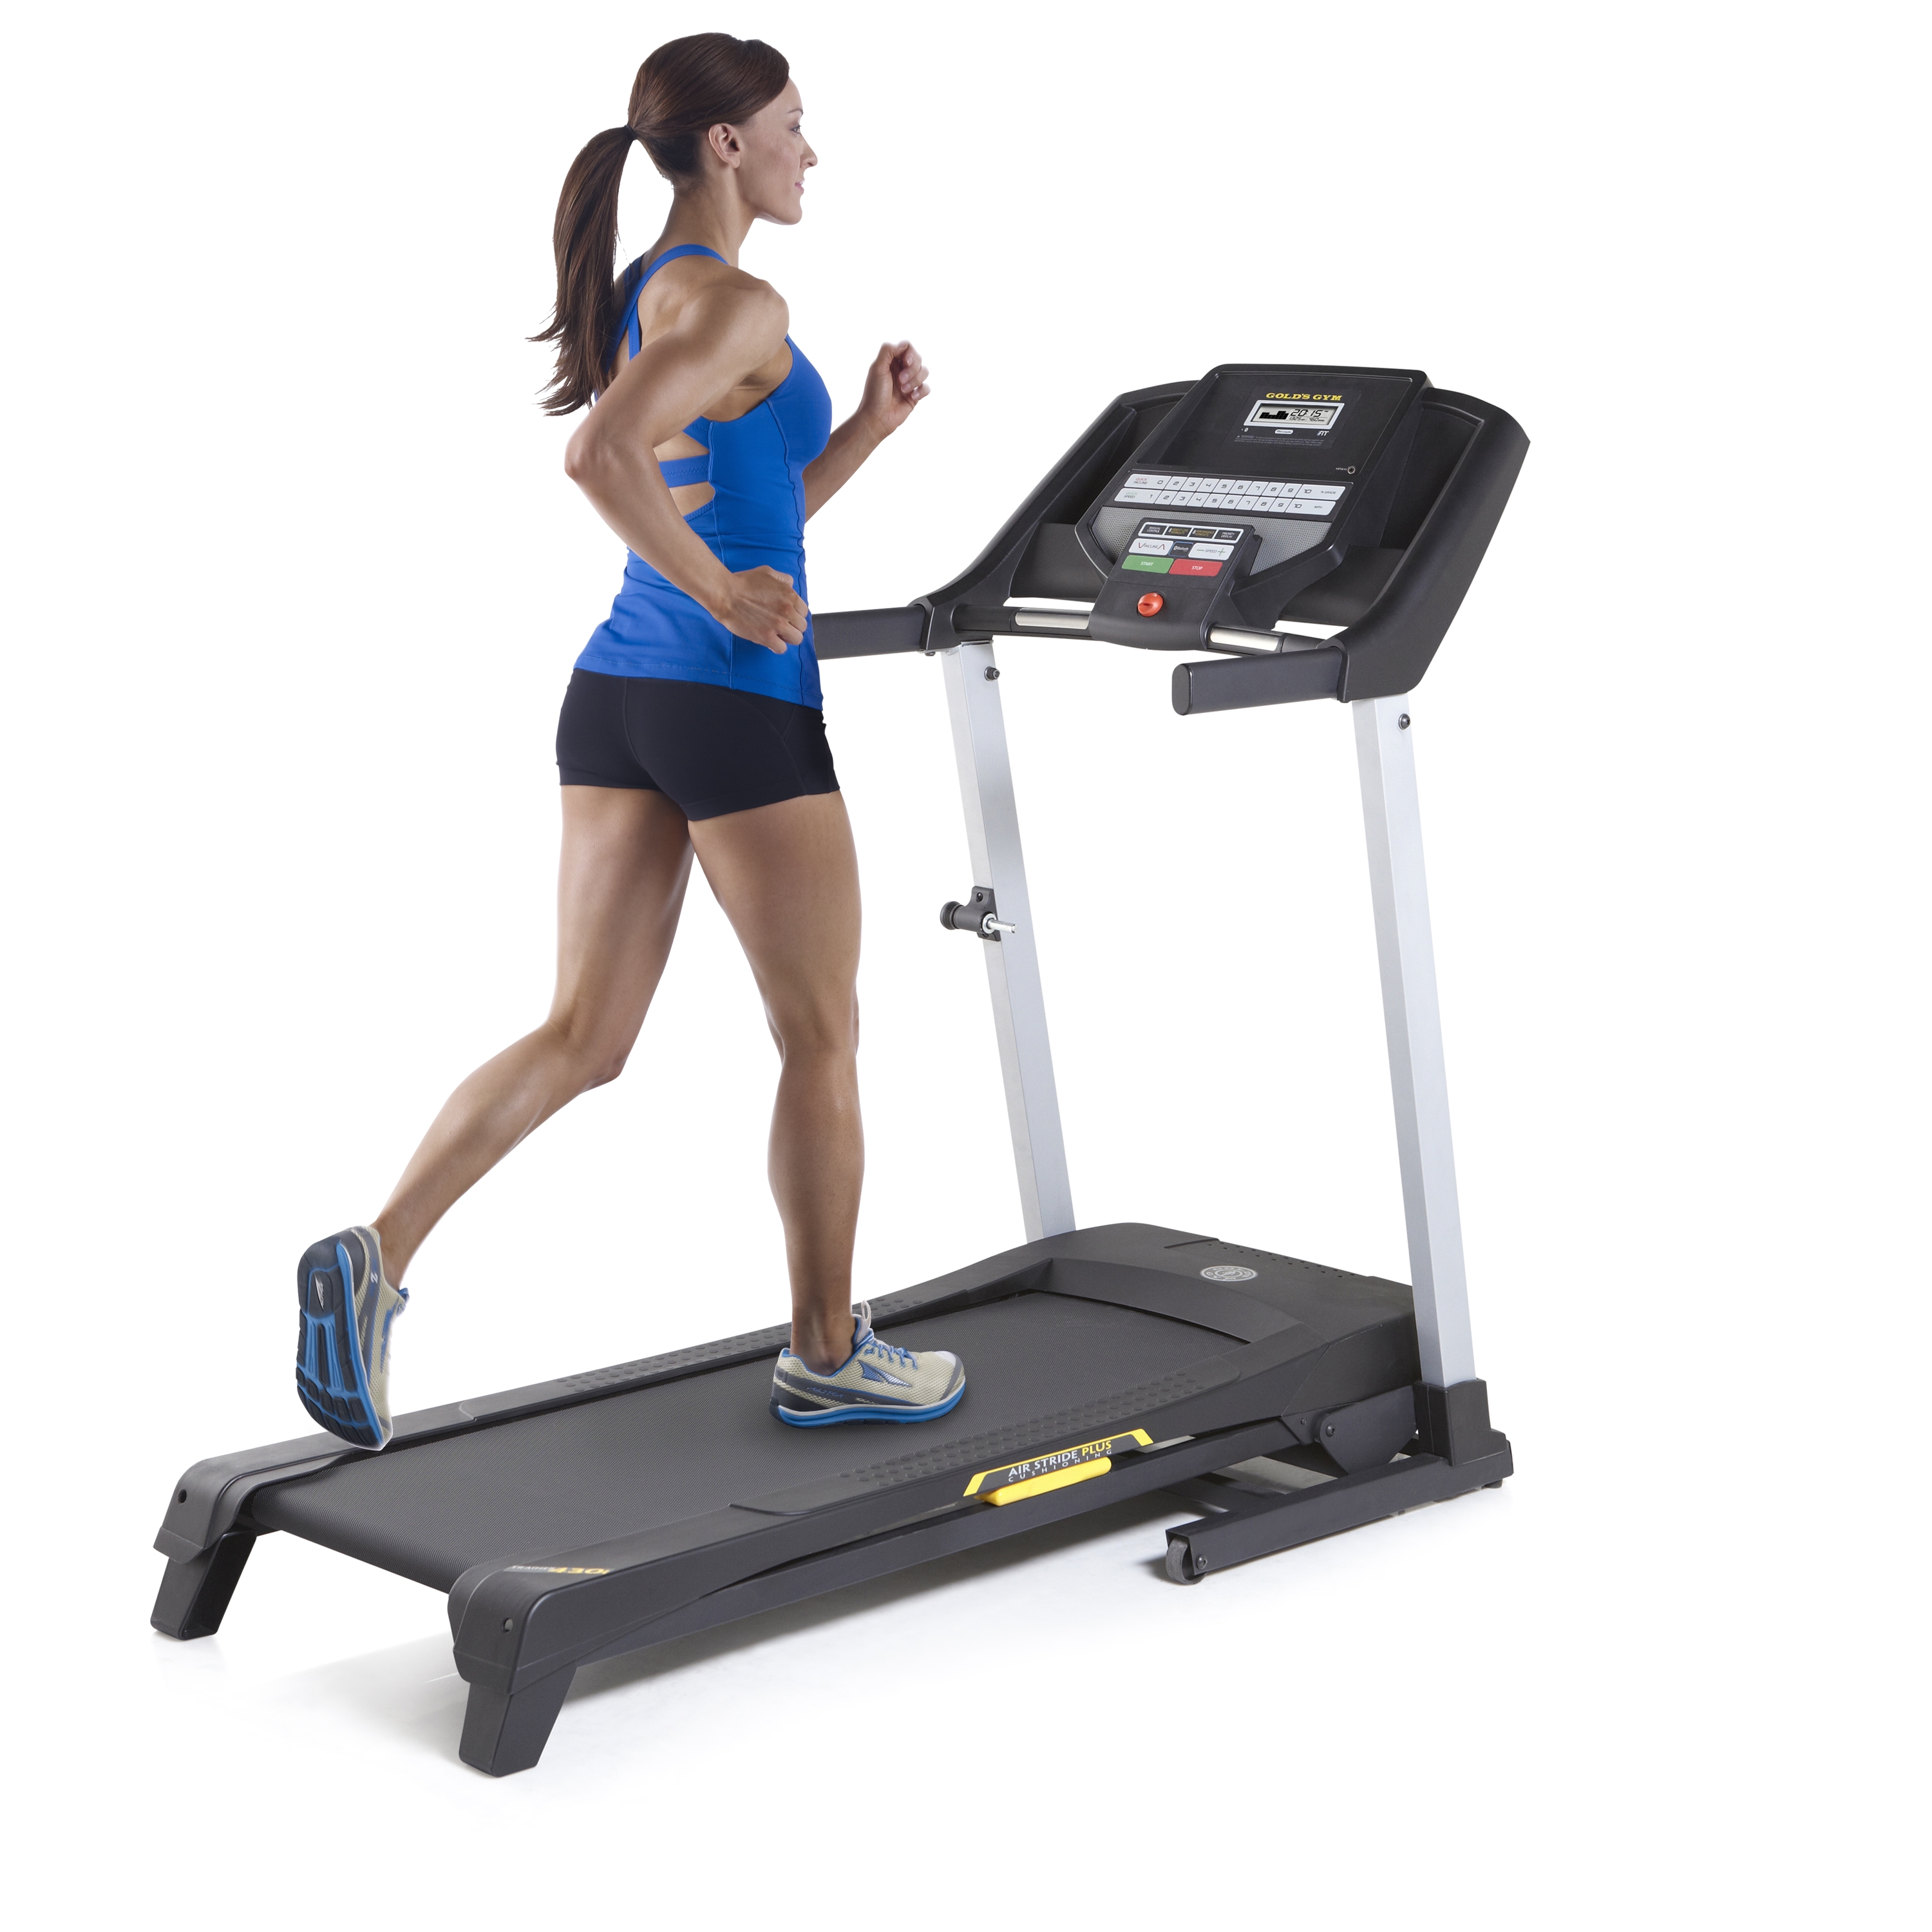 golds gym trainer 430i treadmill with easy assembly and power incline walmart com